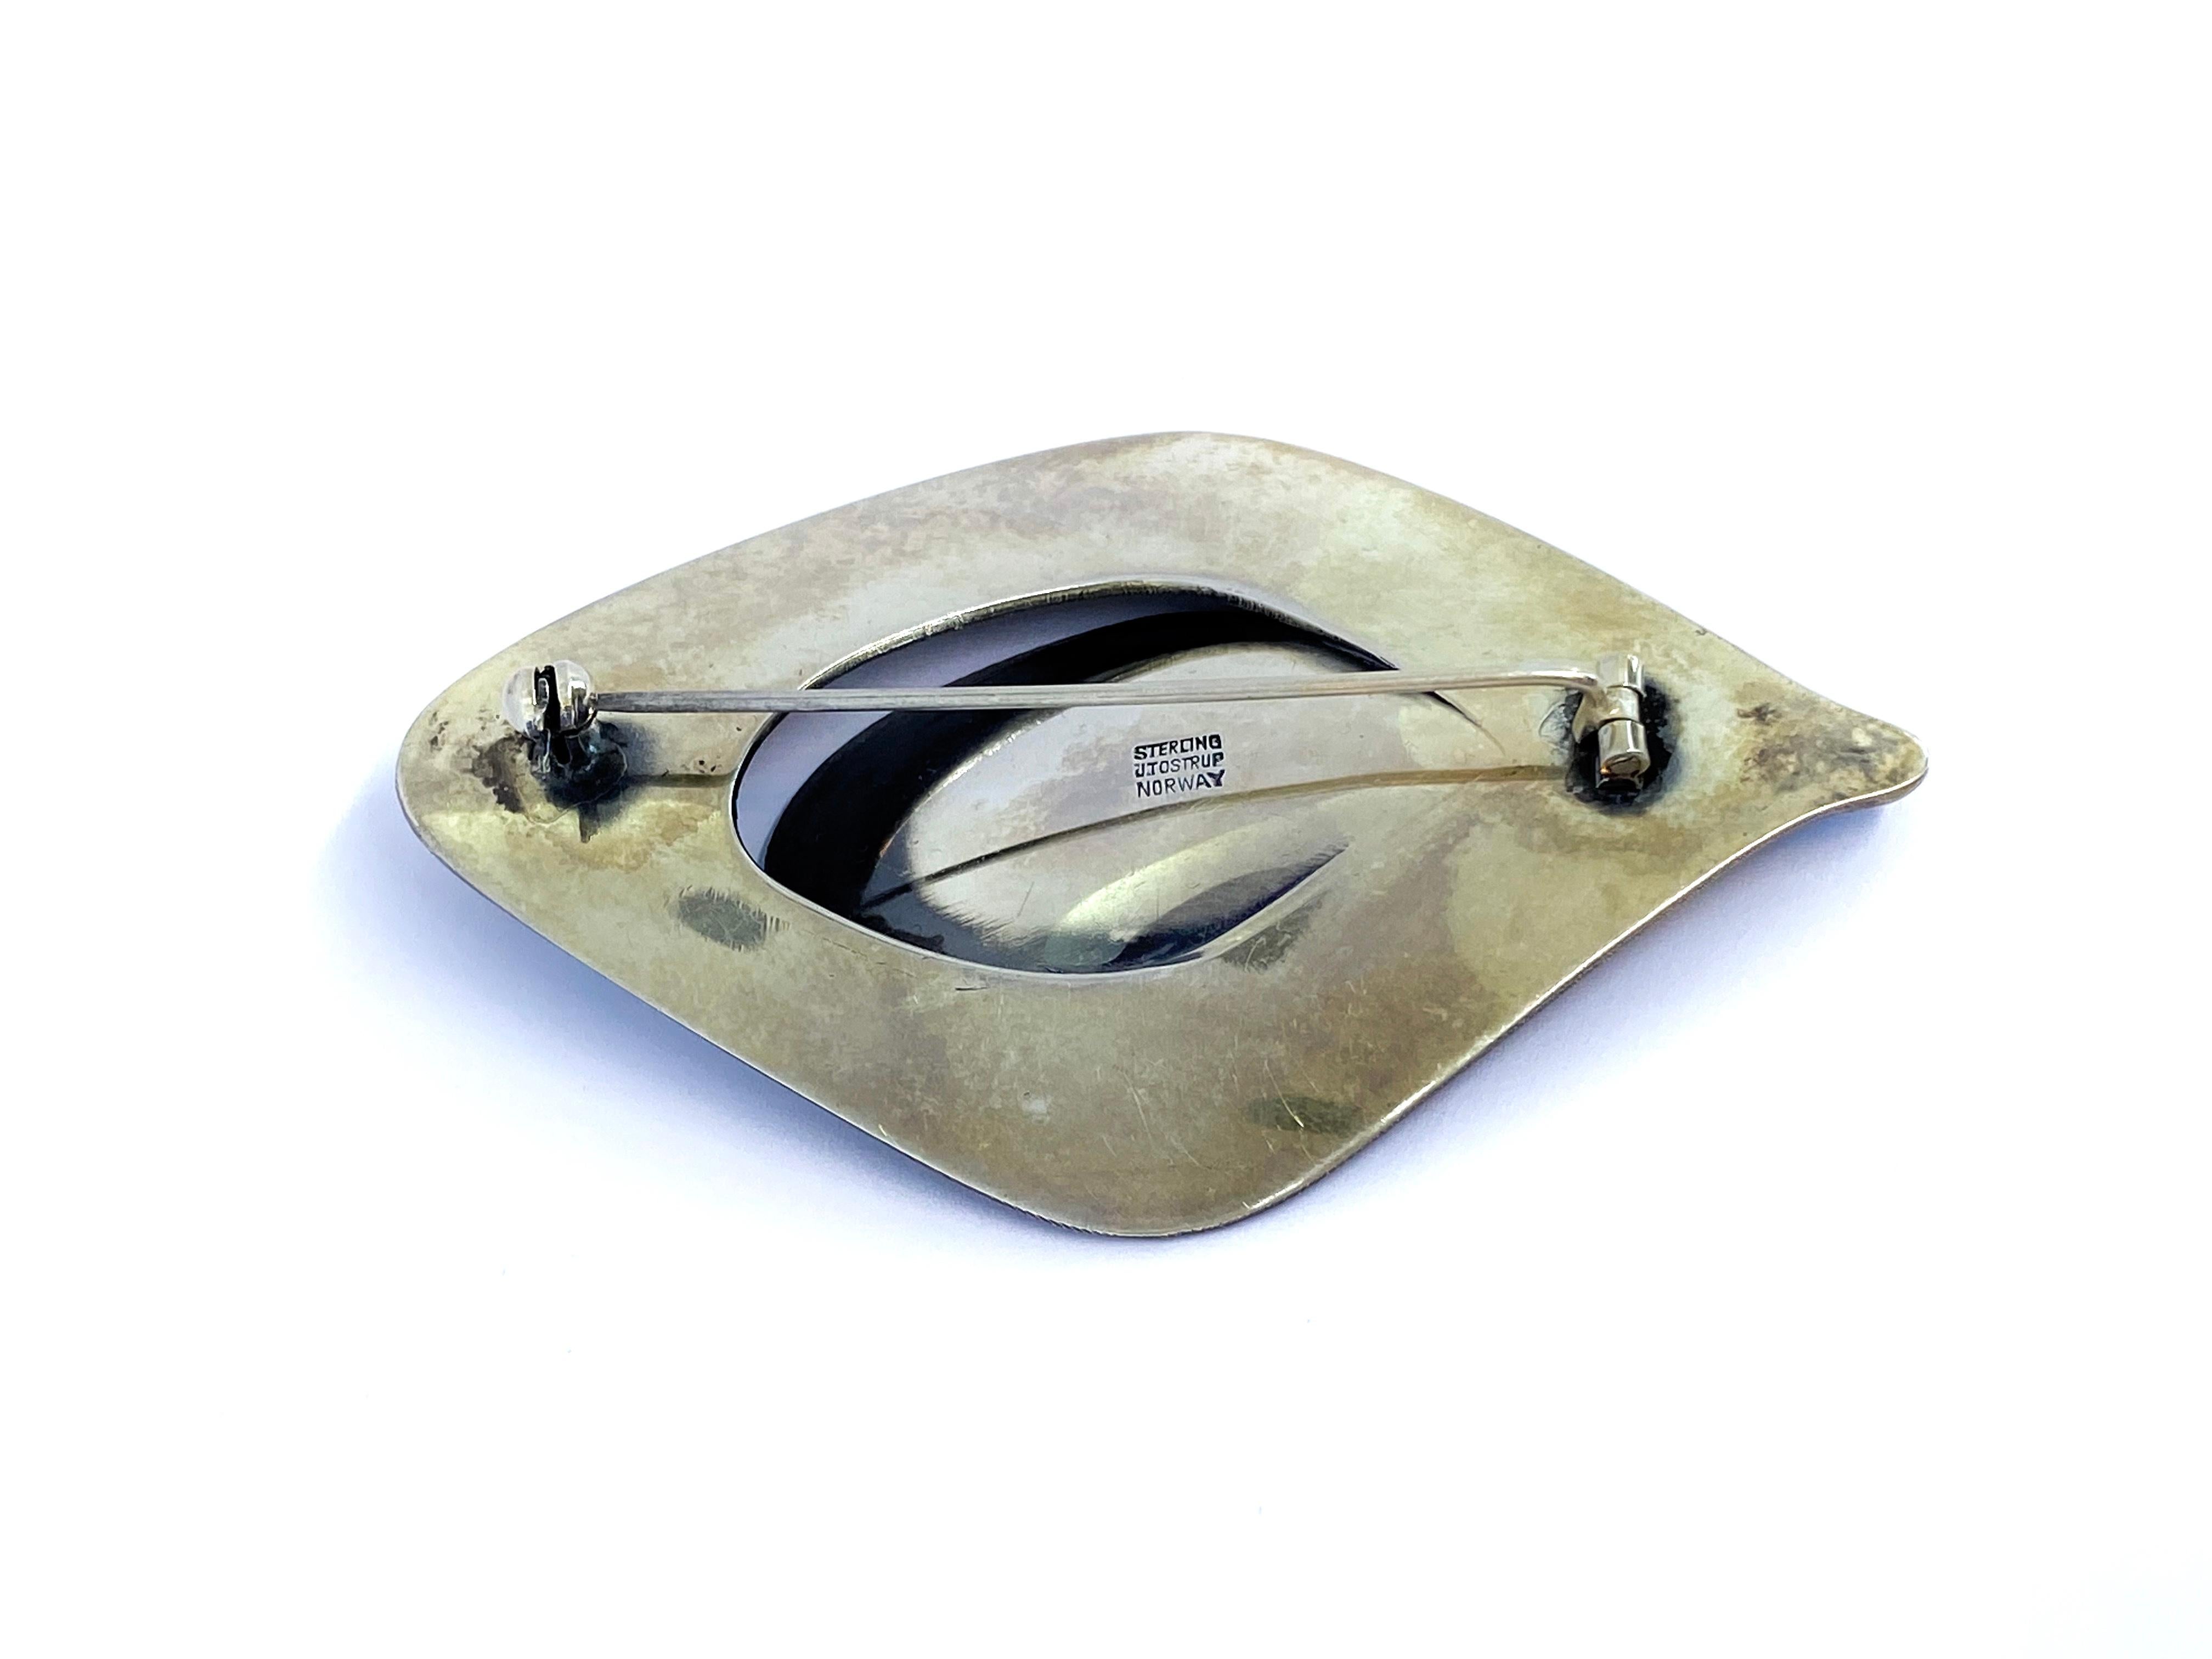 Stunning silver brooch by Grete Prytz Kittelsen. The fine pattern and its industrial look serve as a backdrop for the petal coming from the surface. Really awesome design.
The note is a lovely vintage mid-century sterling silver
Brooch, from the